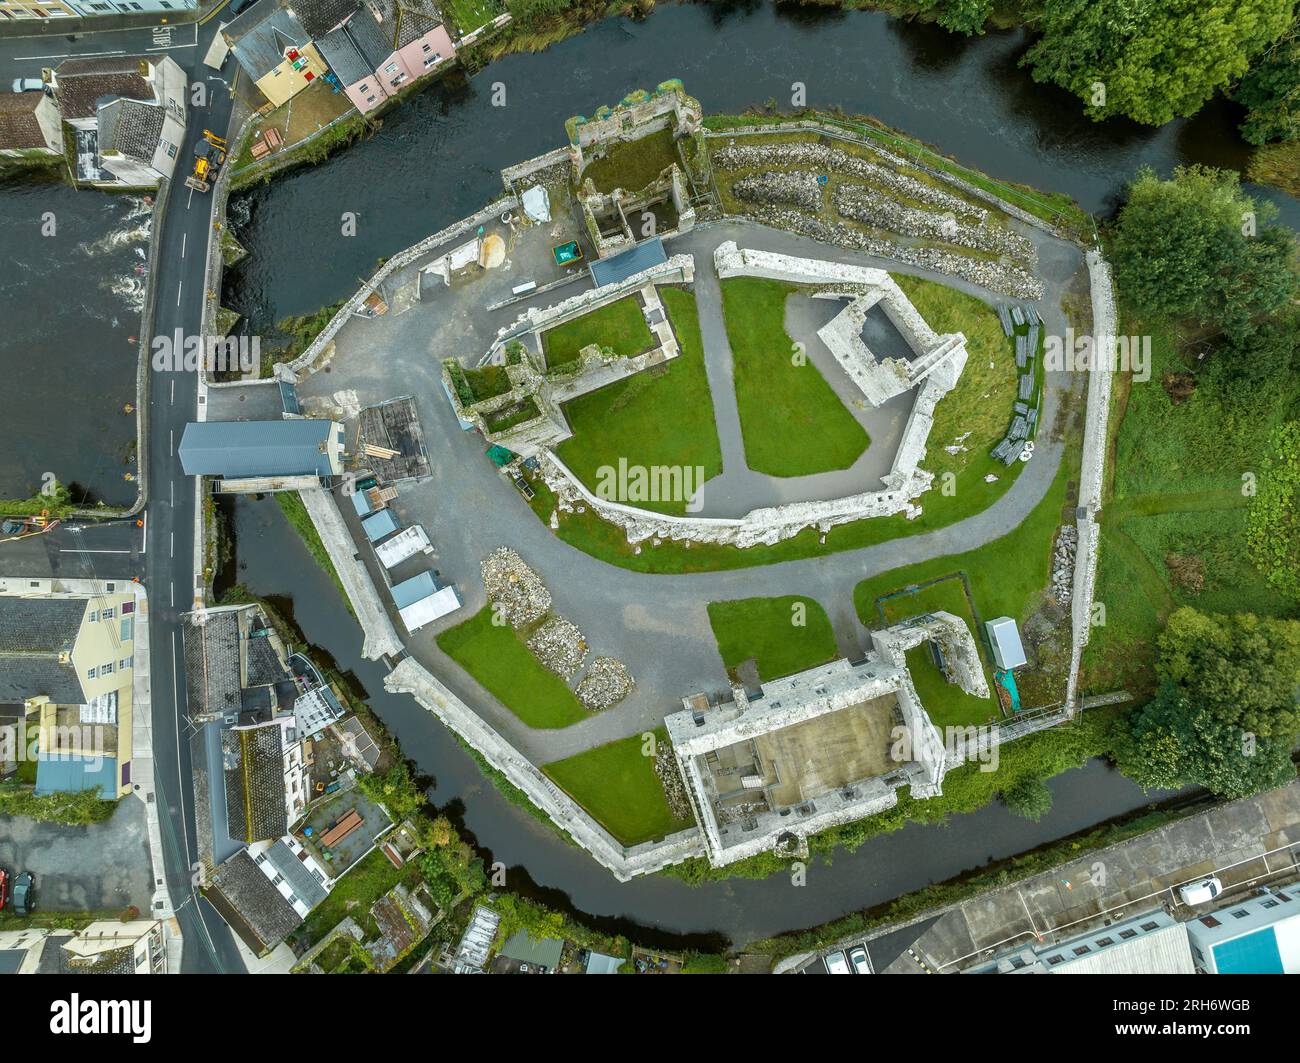 Aerial view of the Desmond castle in Askeaton Ireland in County Limerick on the river Deel, with Gothic Banqueting Hall, finest medieval secular build Stock Photo